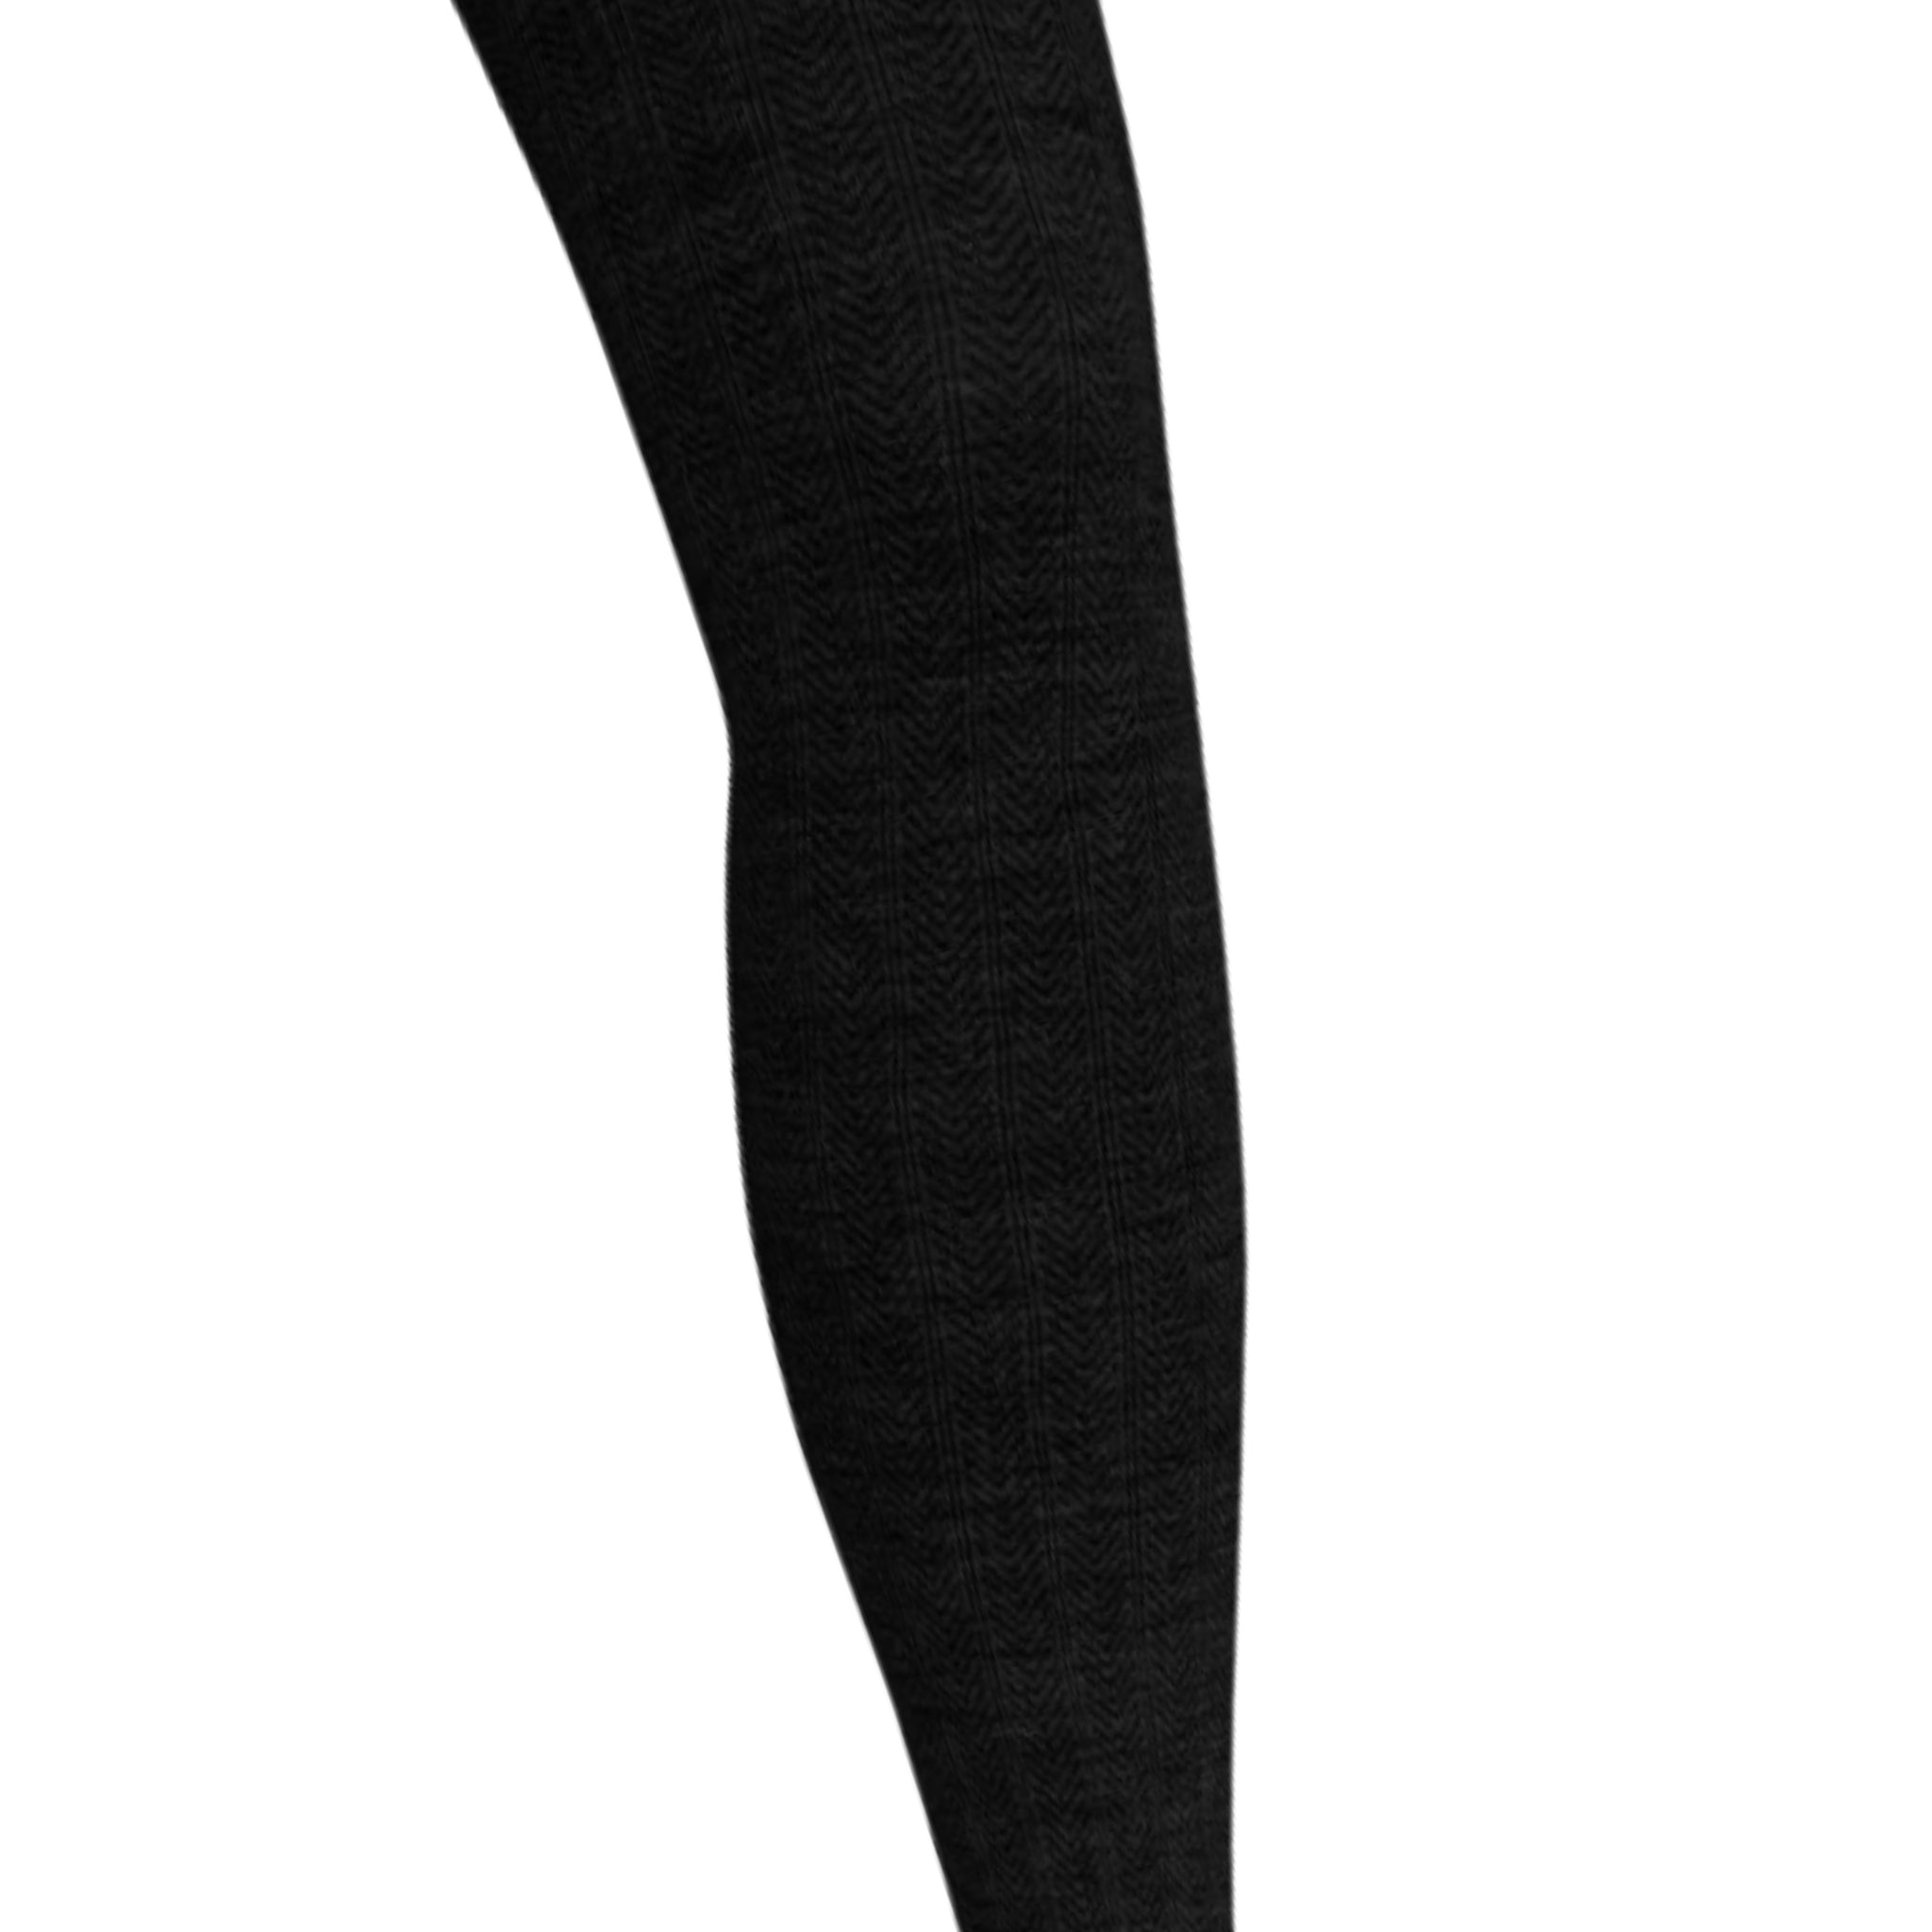 Tightology Martini Patterned Woollen Tights